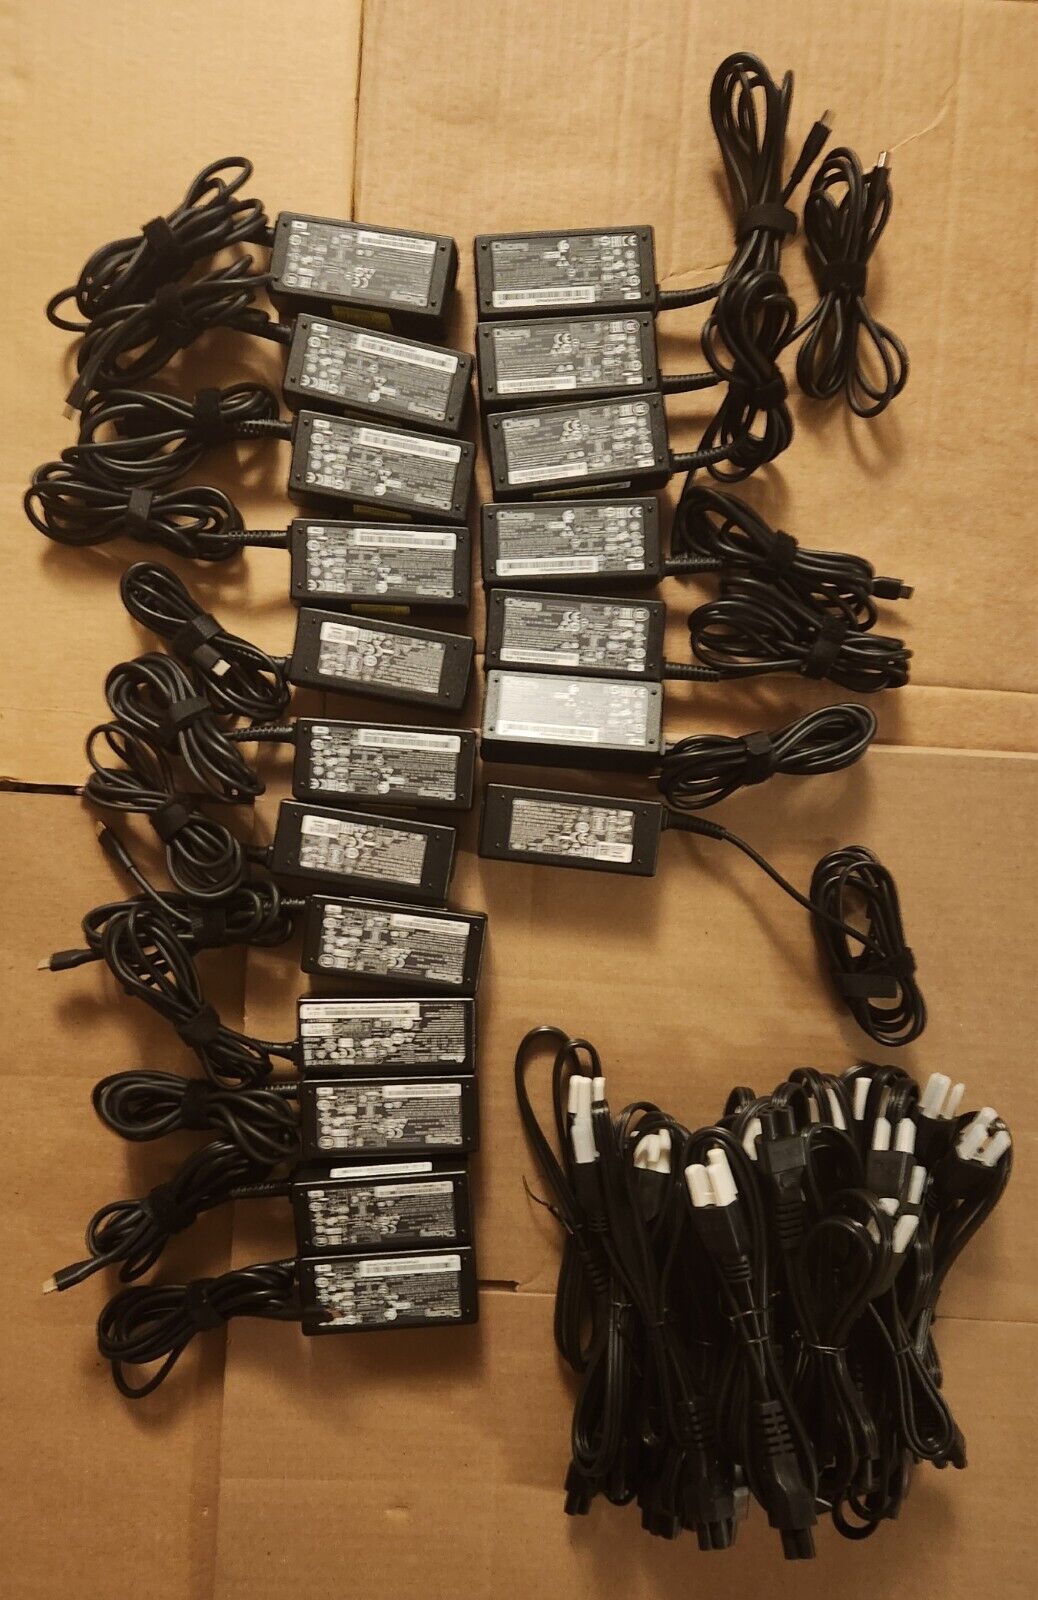 Lot of 19 BRAND NEW OEM GENUINE Chicony A16-045N1A usb type C chargers 45W